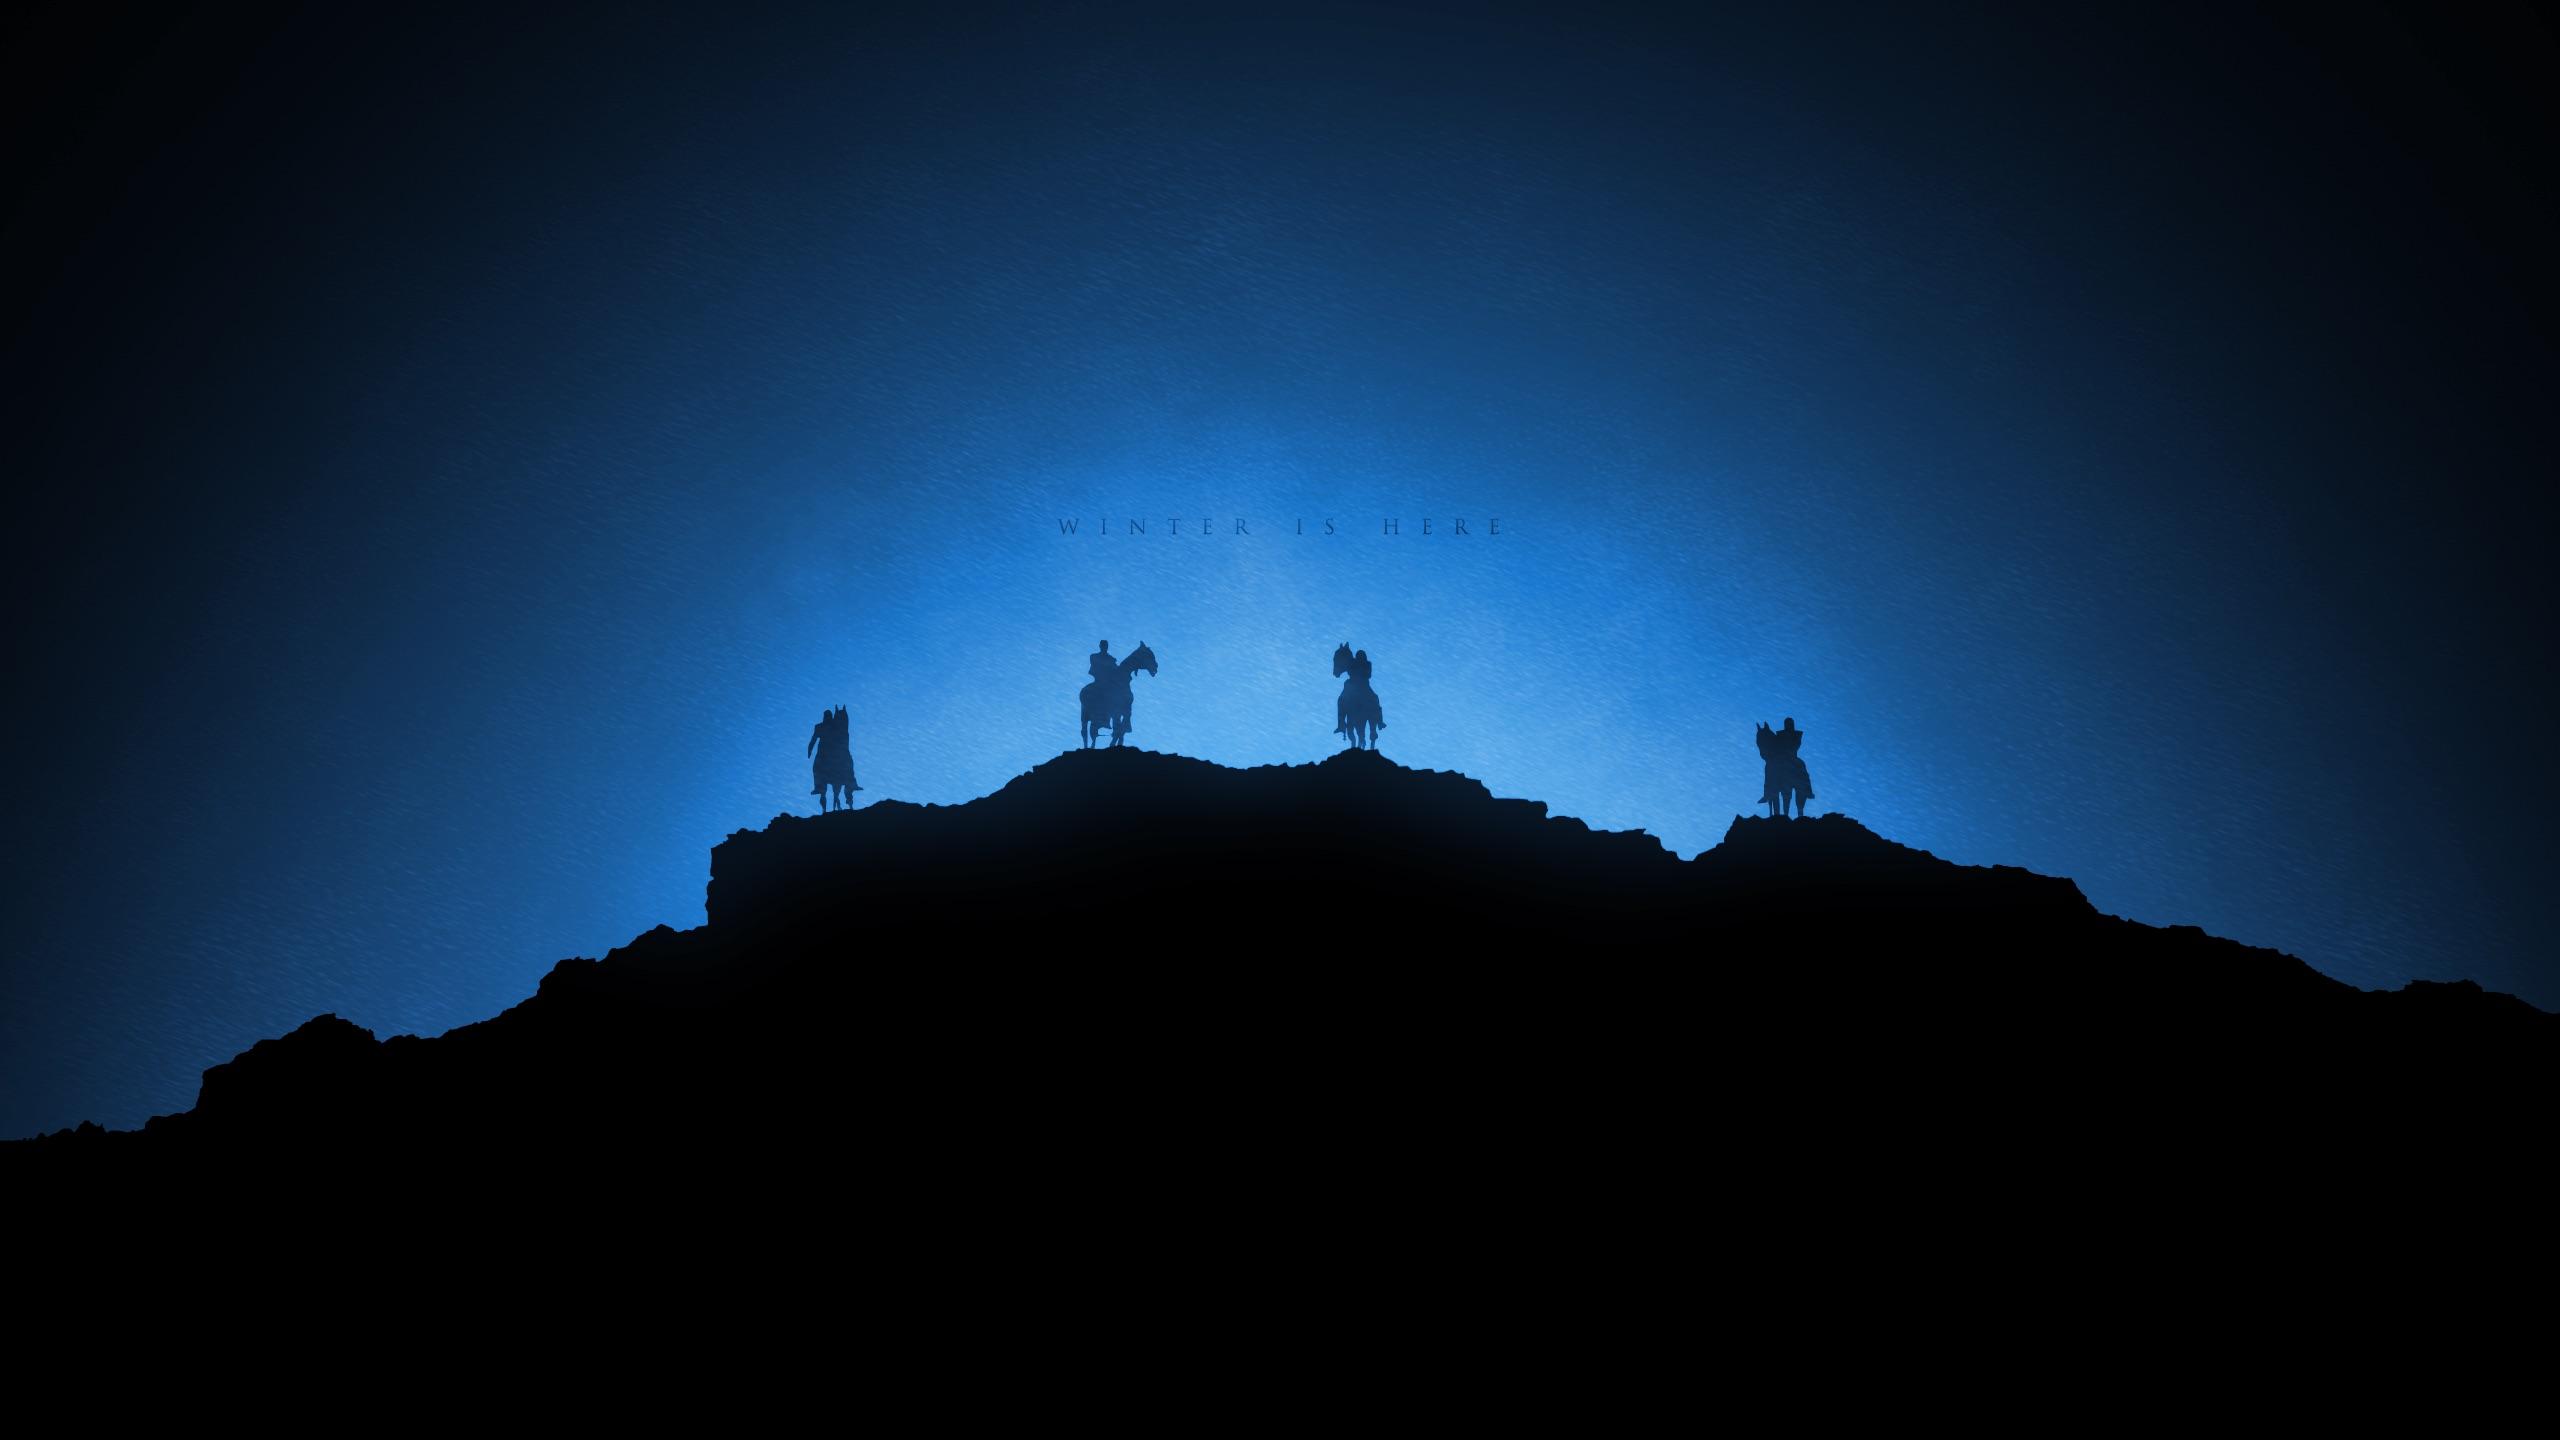 Can someone resize and make OLED, favorite desktop Game of Thrones